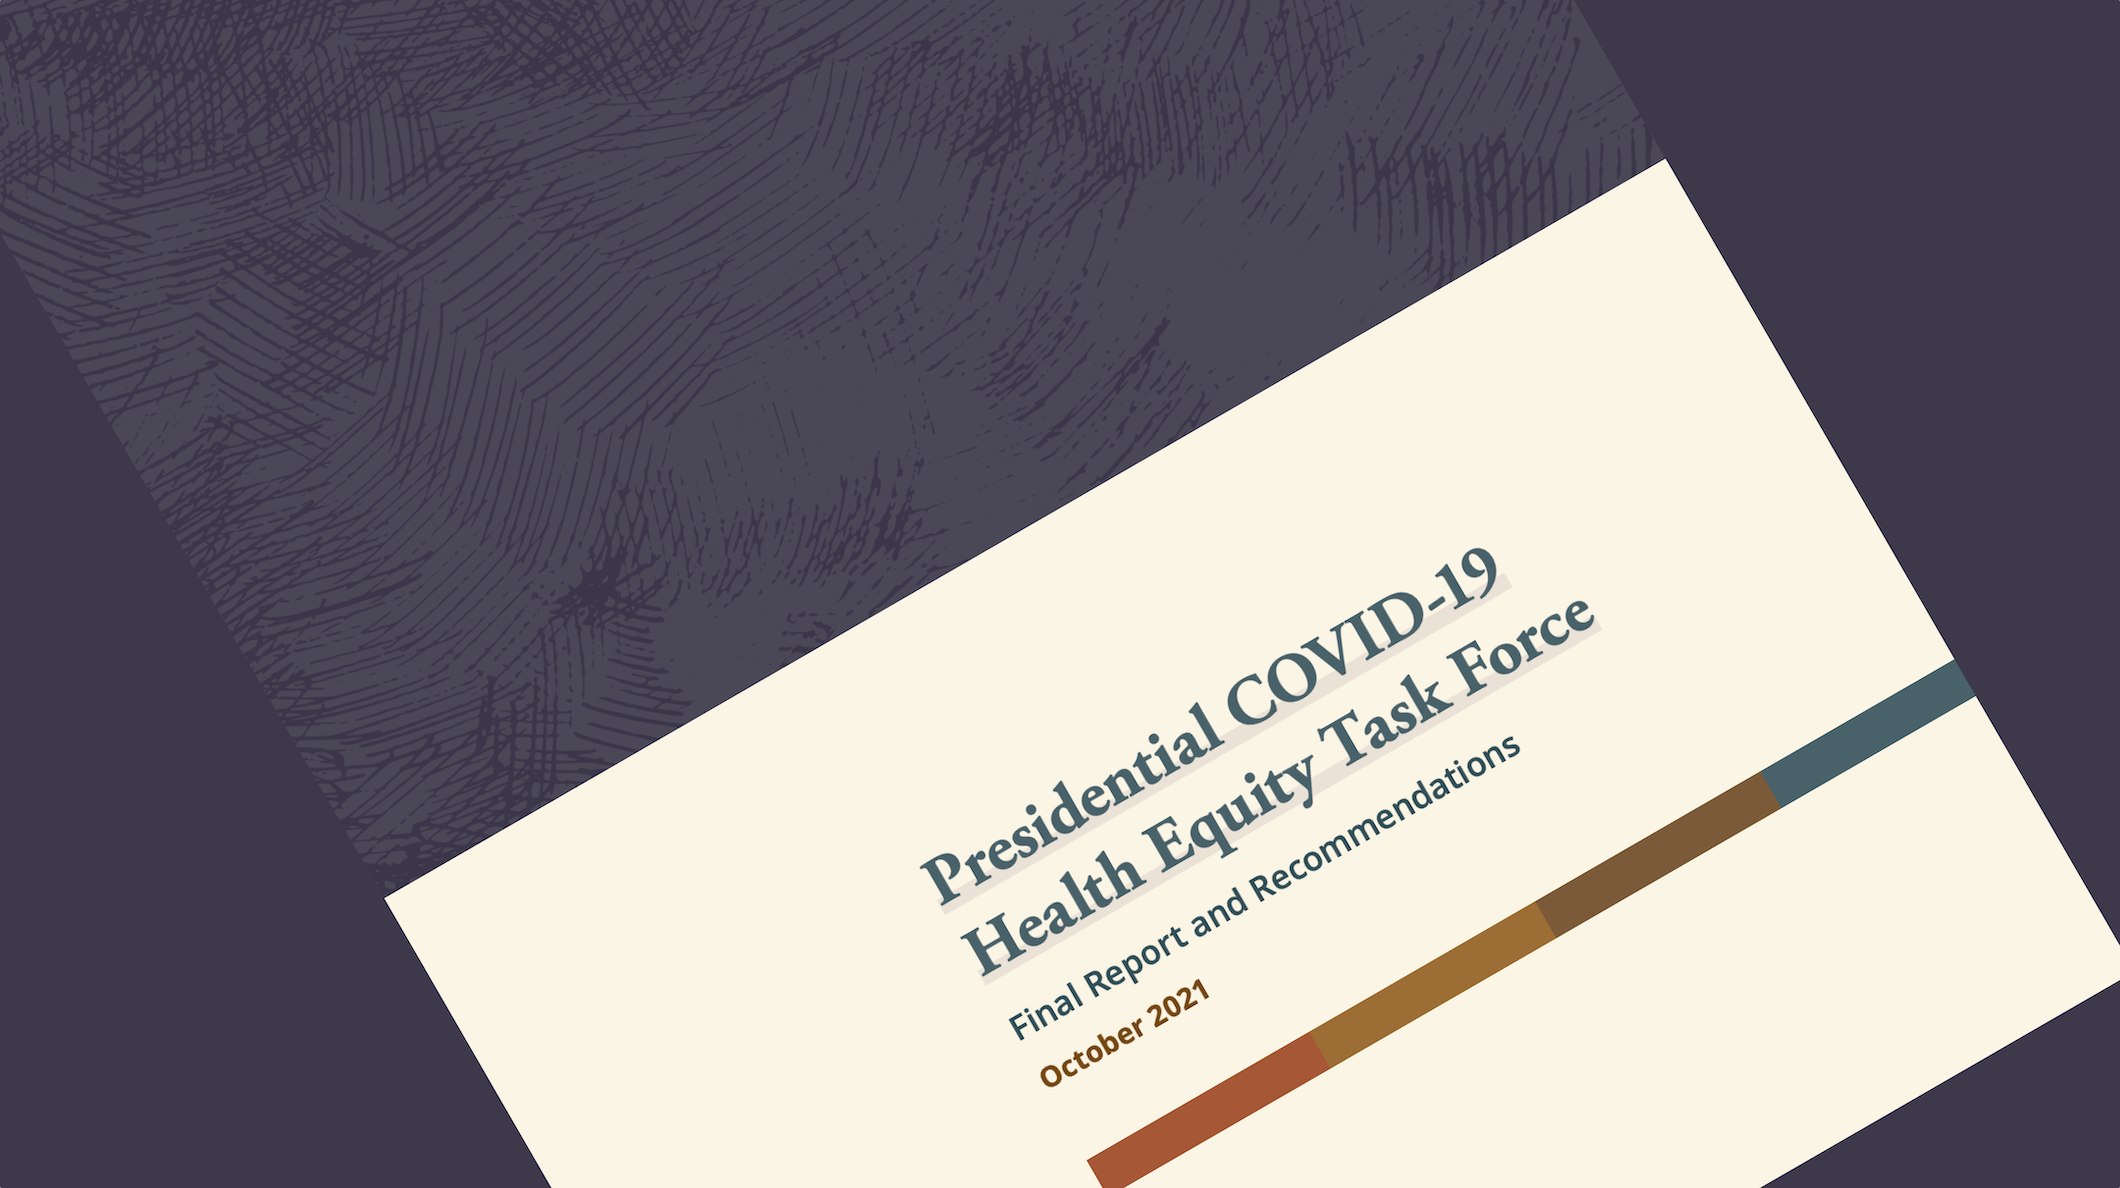 The purple and yellow cover of a report titled Presidential COVID-19 Health Equity Task Force is displayed at a 30 degree angle on a dark purple background.